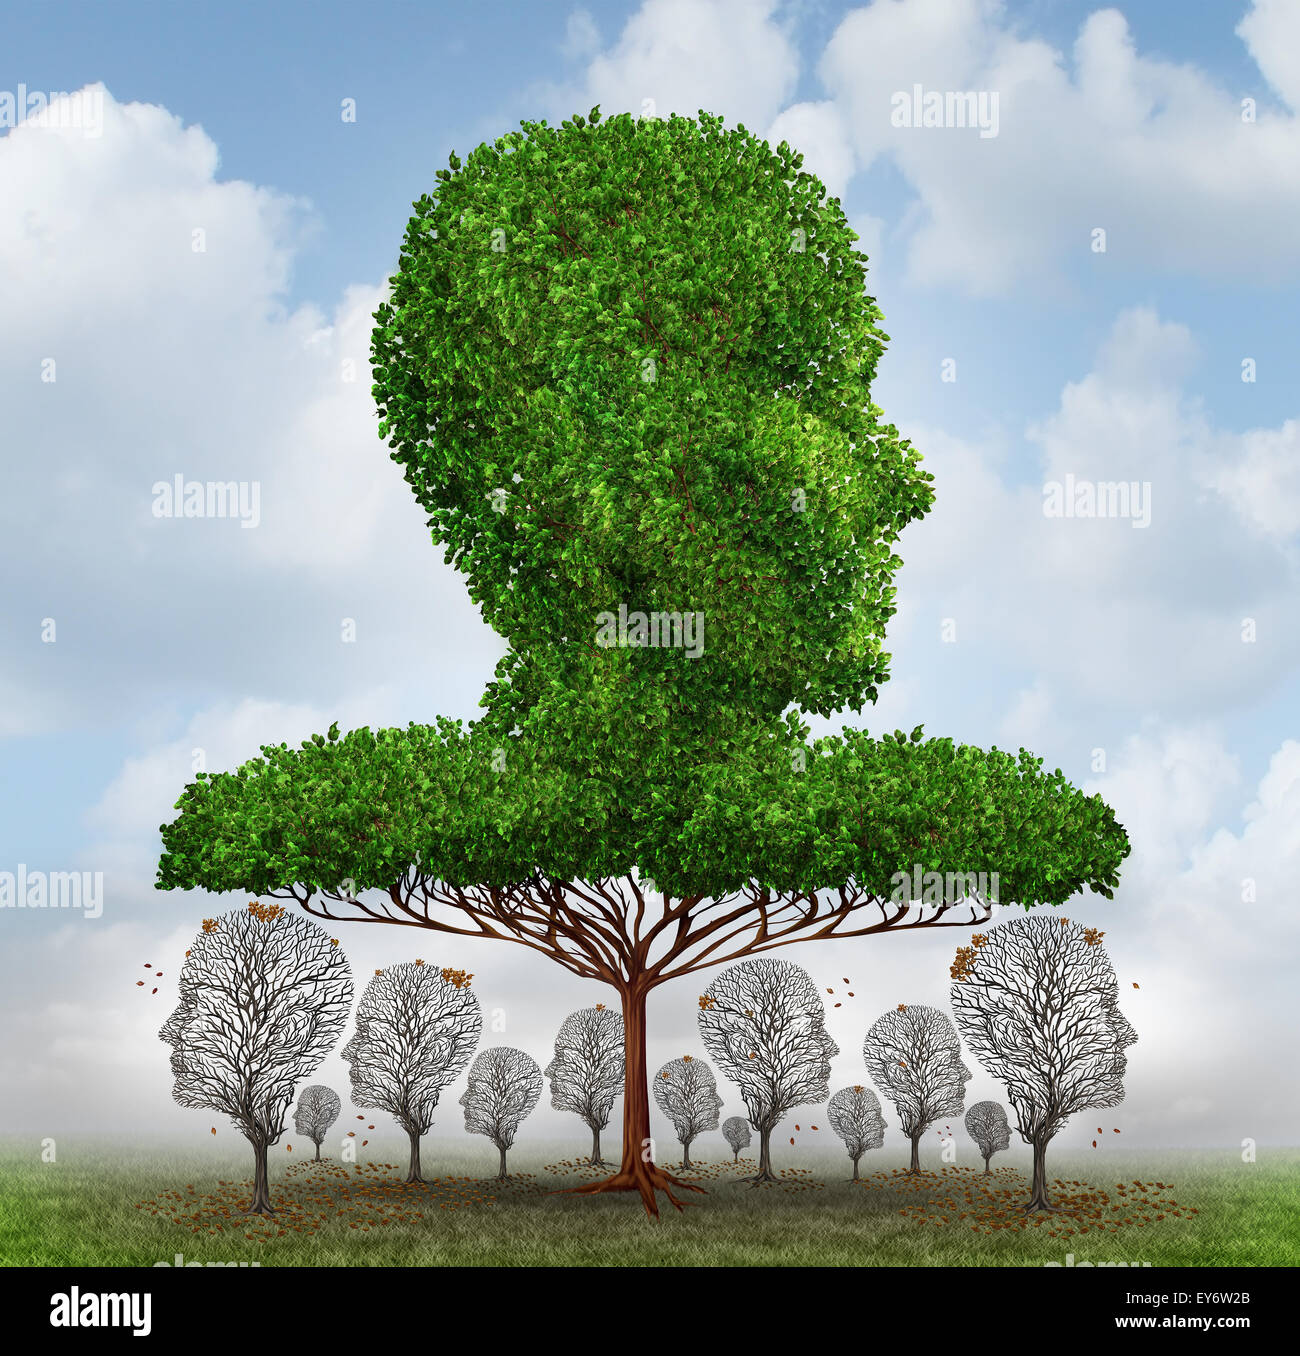 Social inequality concept as a giant tree shaped as a human head blocking the light to smaller trees that have lost their leaves below as an economic symbol of corruption unfairness and disparity between the rich and the poor. Stock Photo